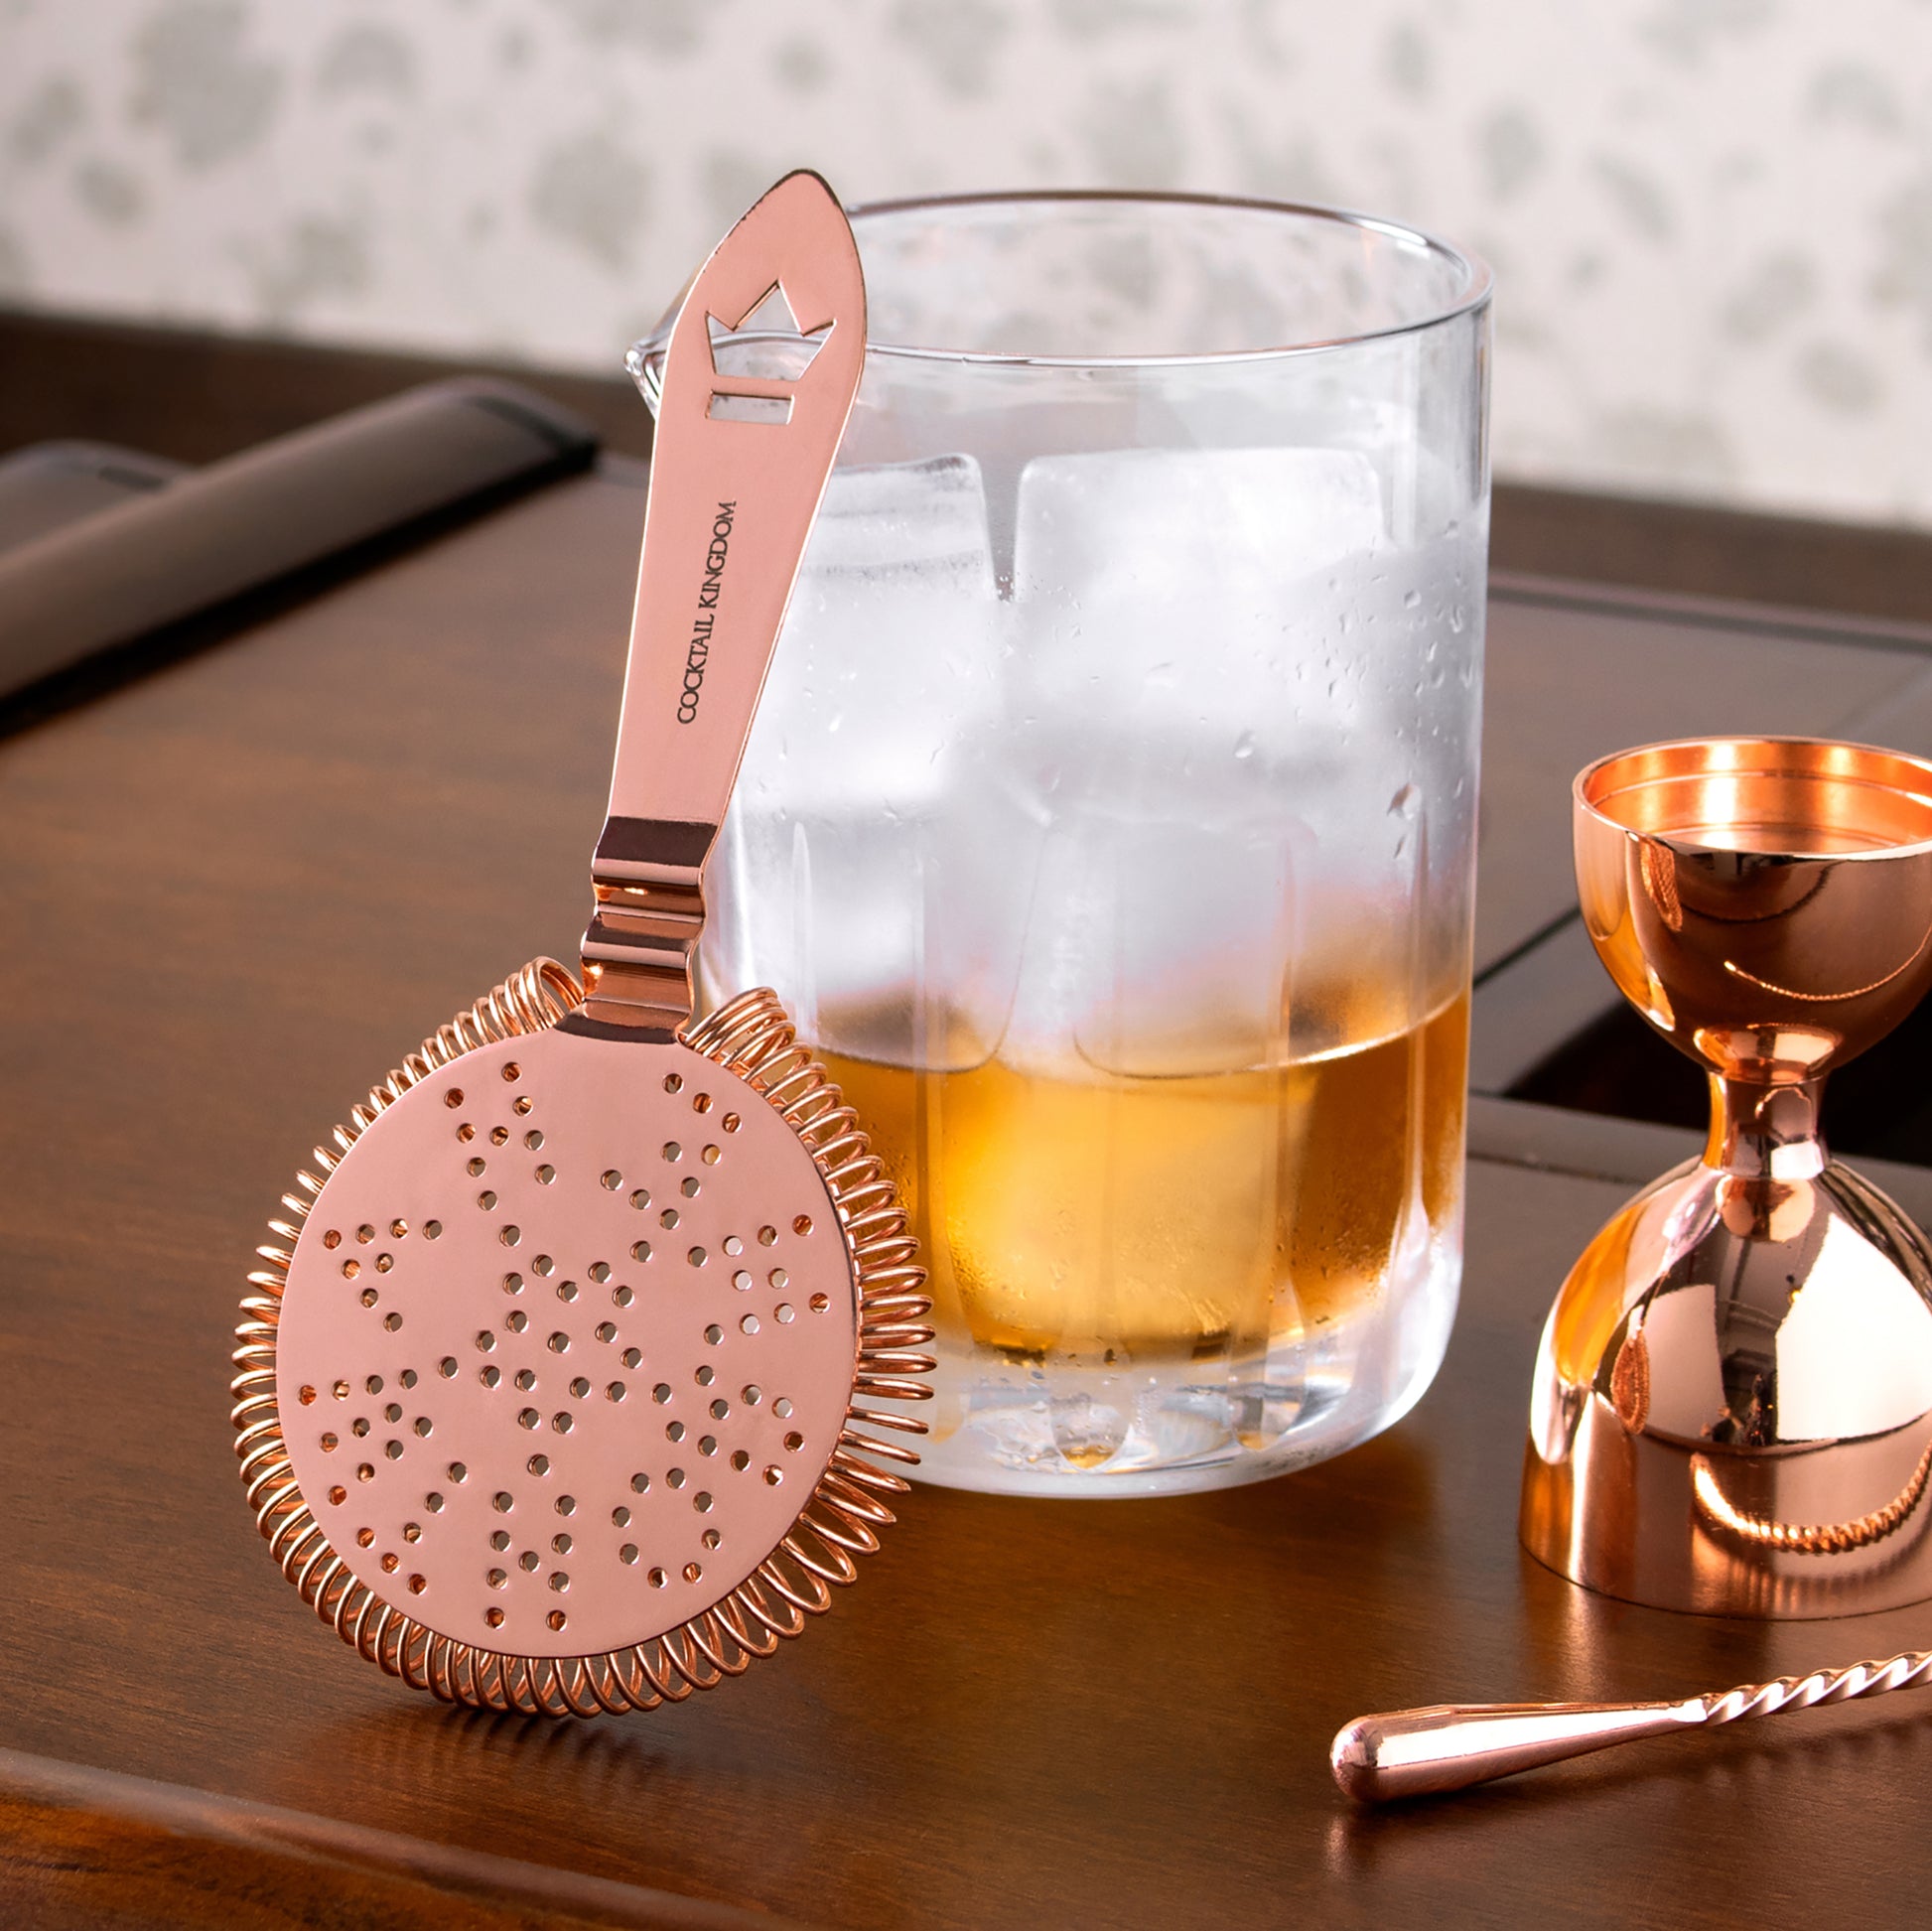 ANTIQUE-STYLE COCKTAIL STRAINER / COPPER-PLATED